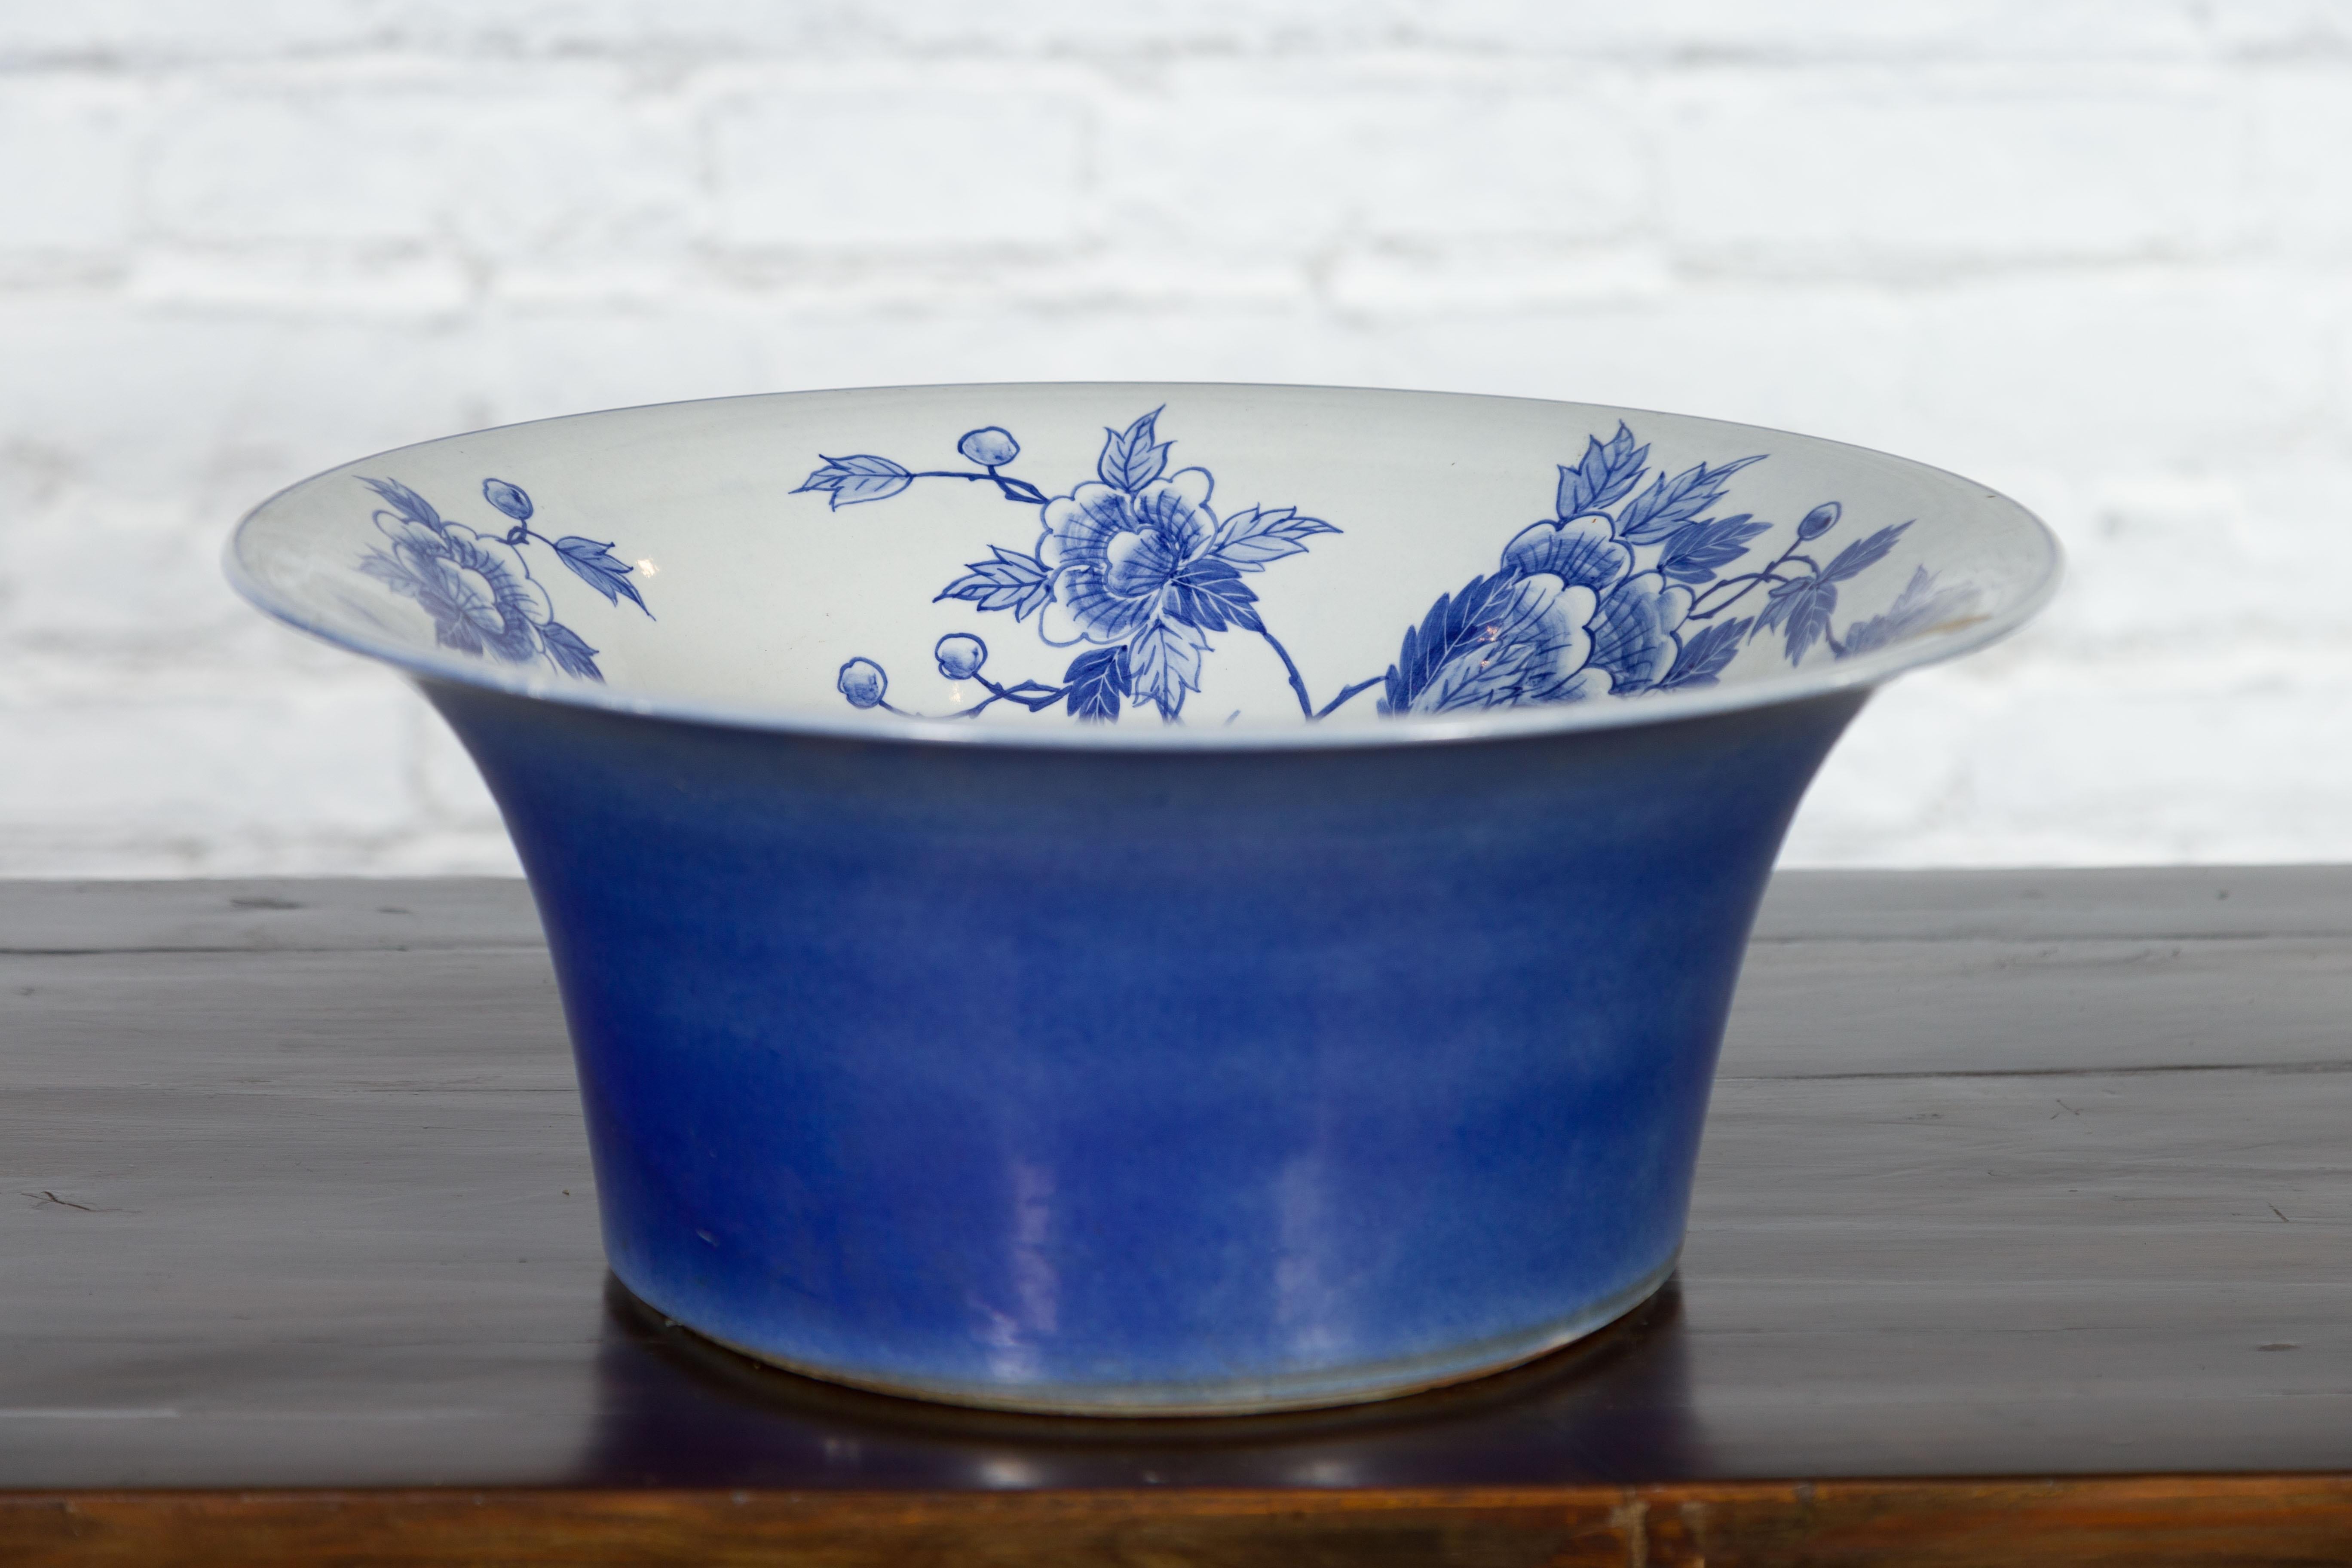 Chinese Blue and White Porcelain Wash Basin with Floral Motifs and Cobalt Blue For Sale 4